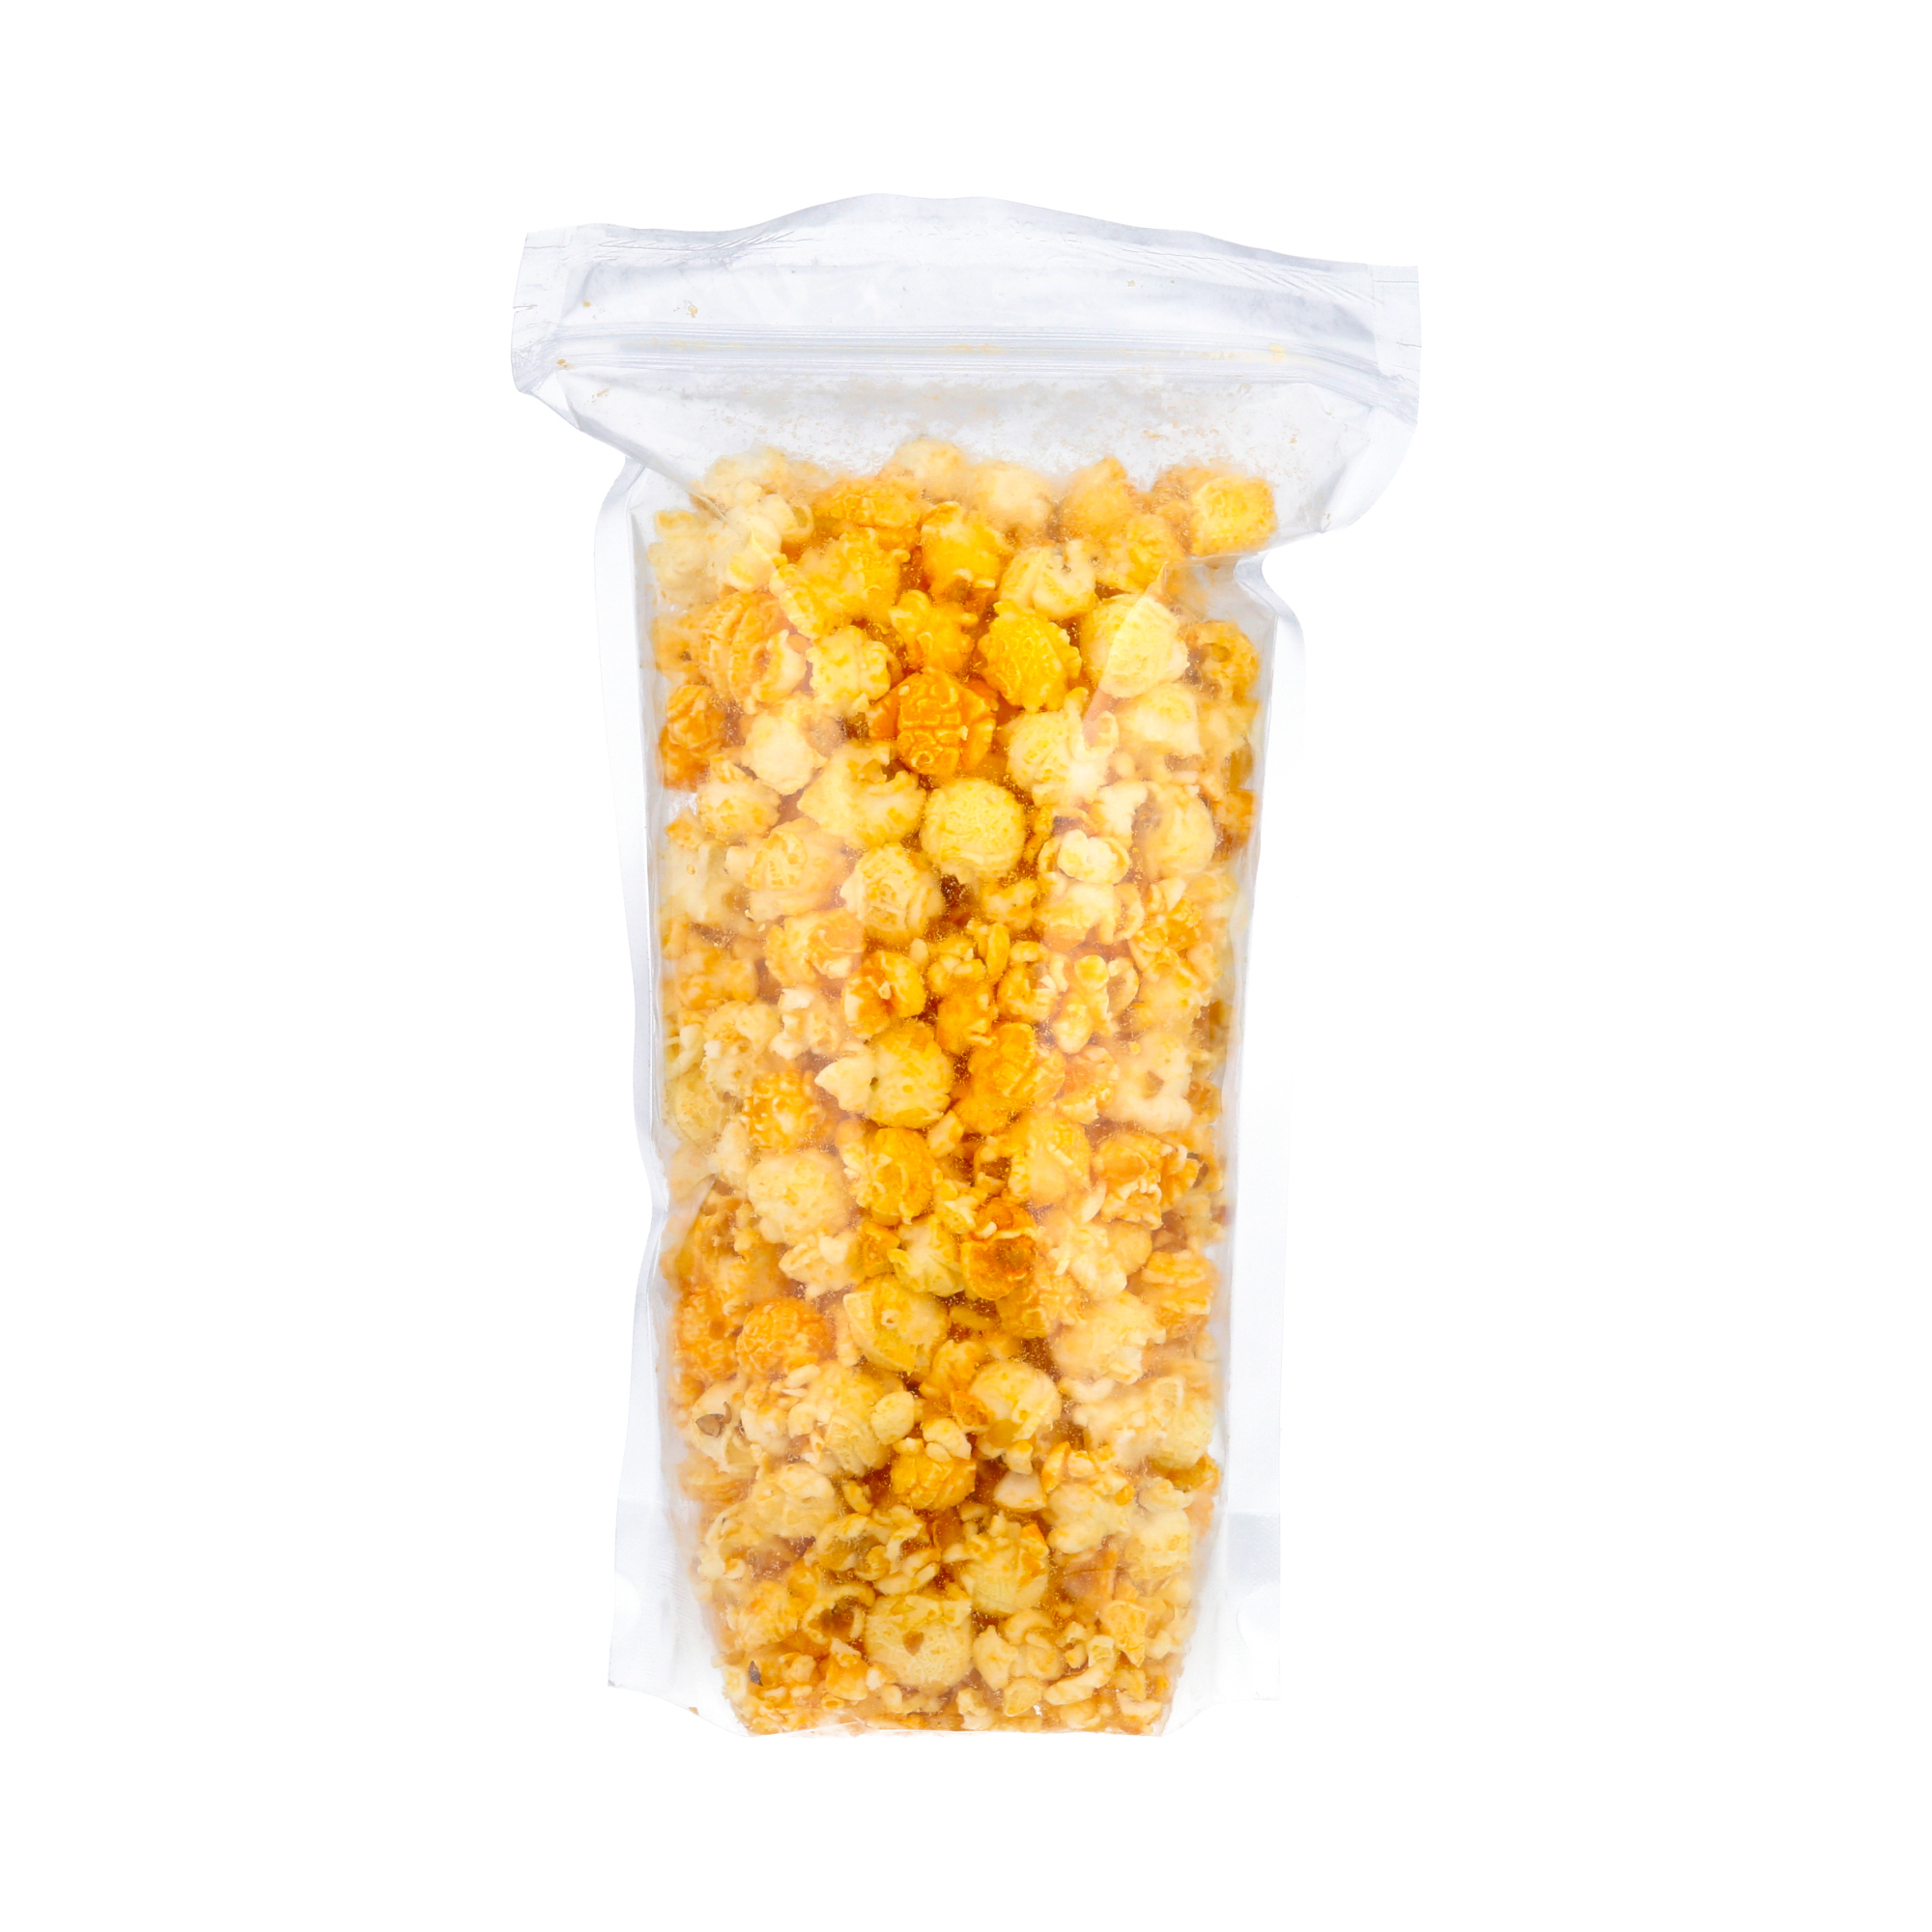 Cheese Lovers – The Popcorn Shop